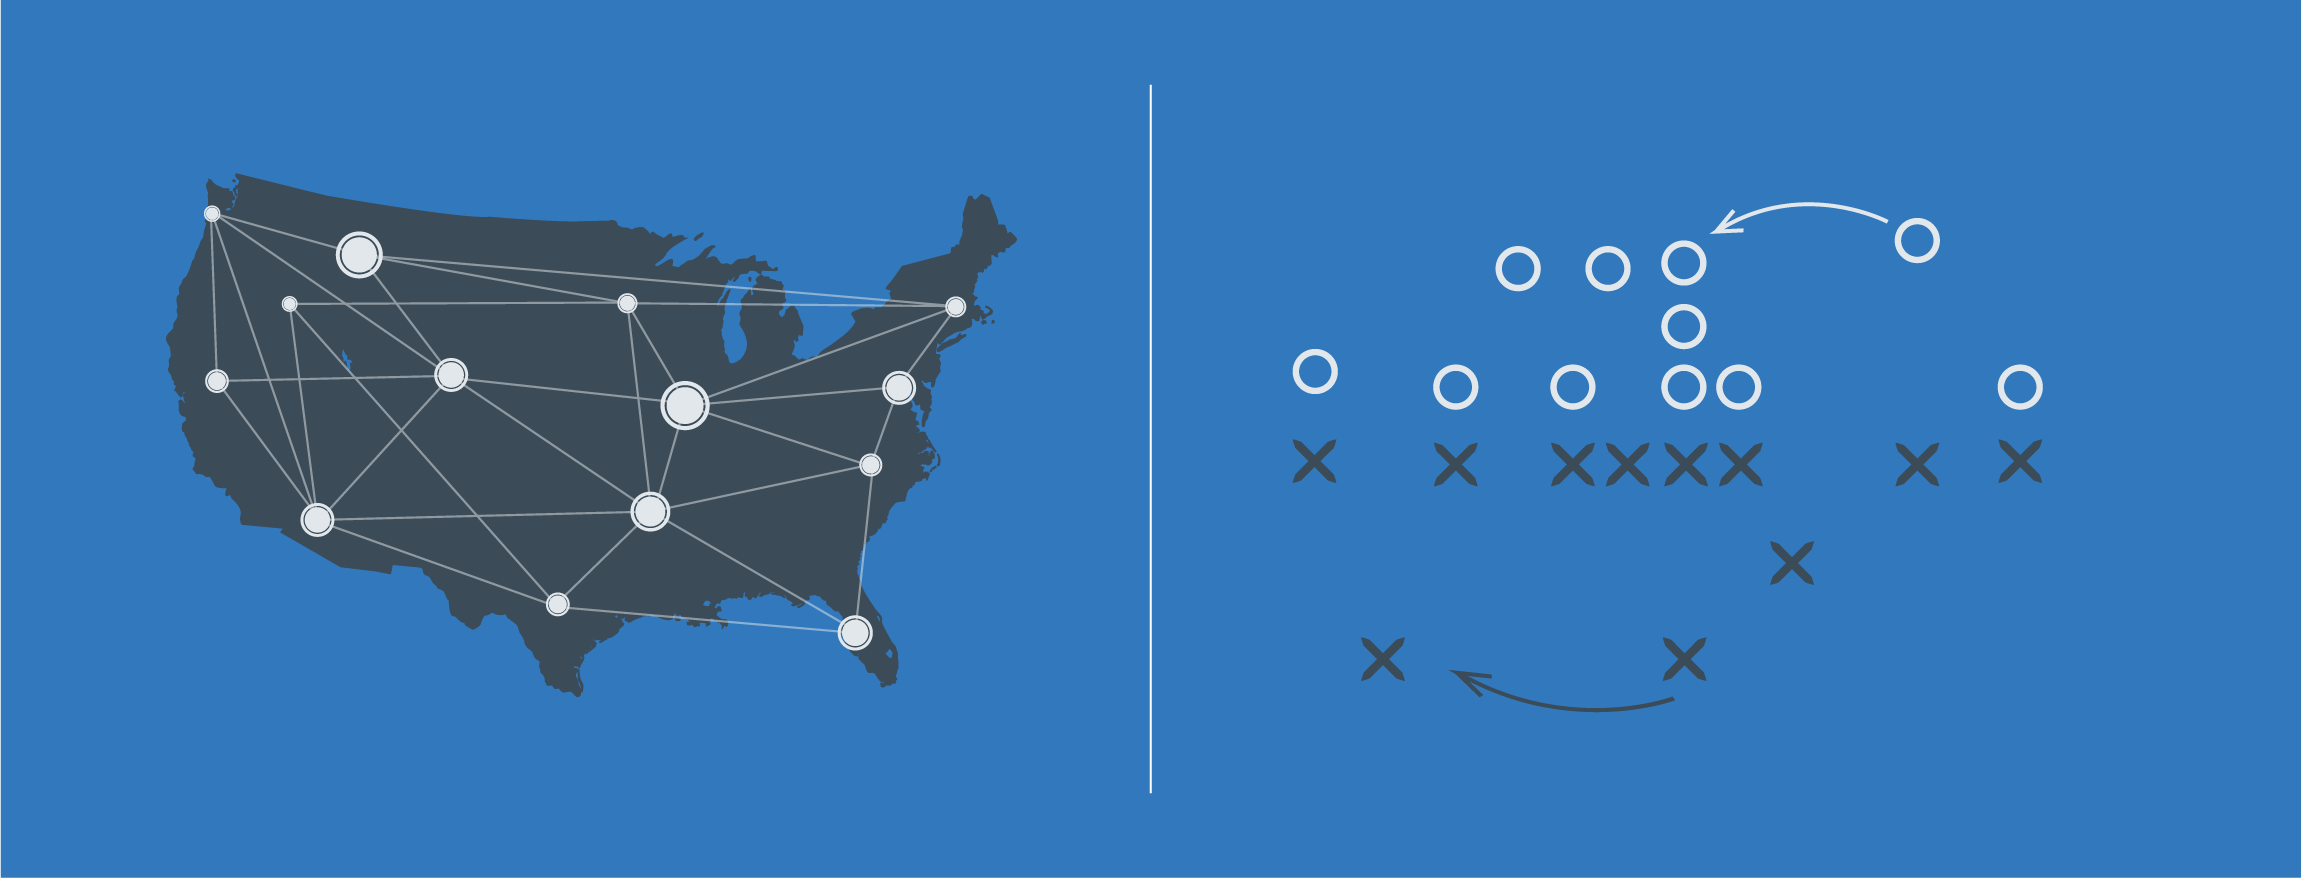 Football or Supply Chain The Playbook_Side by side